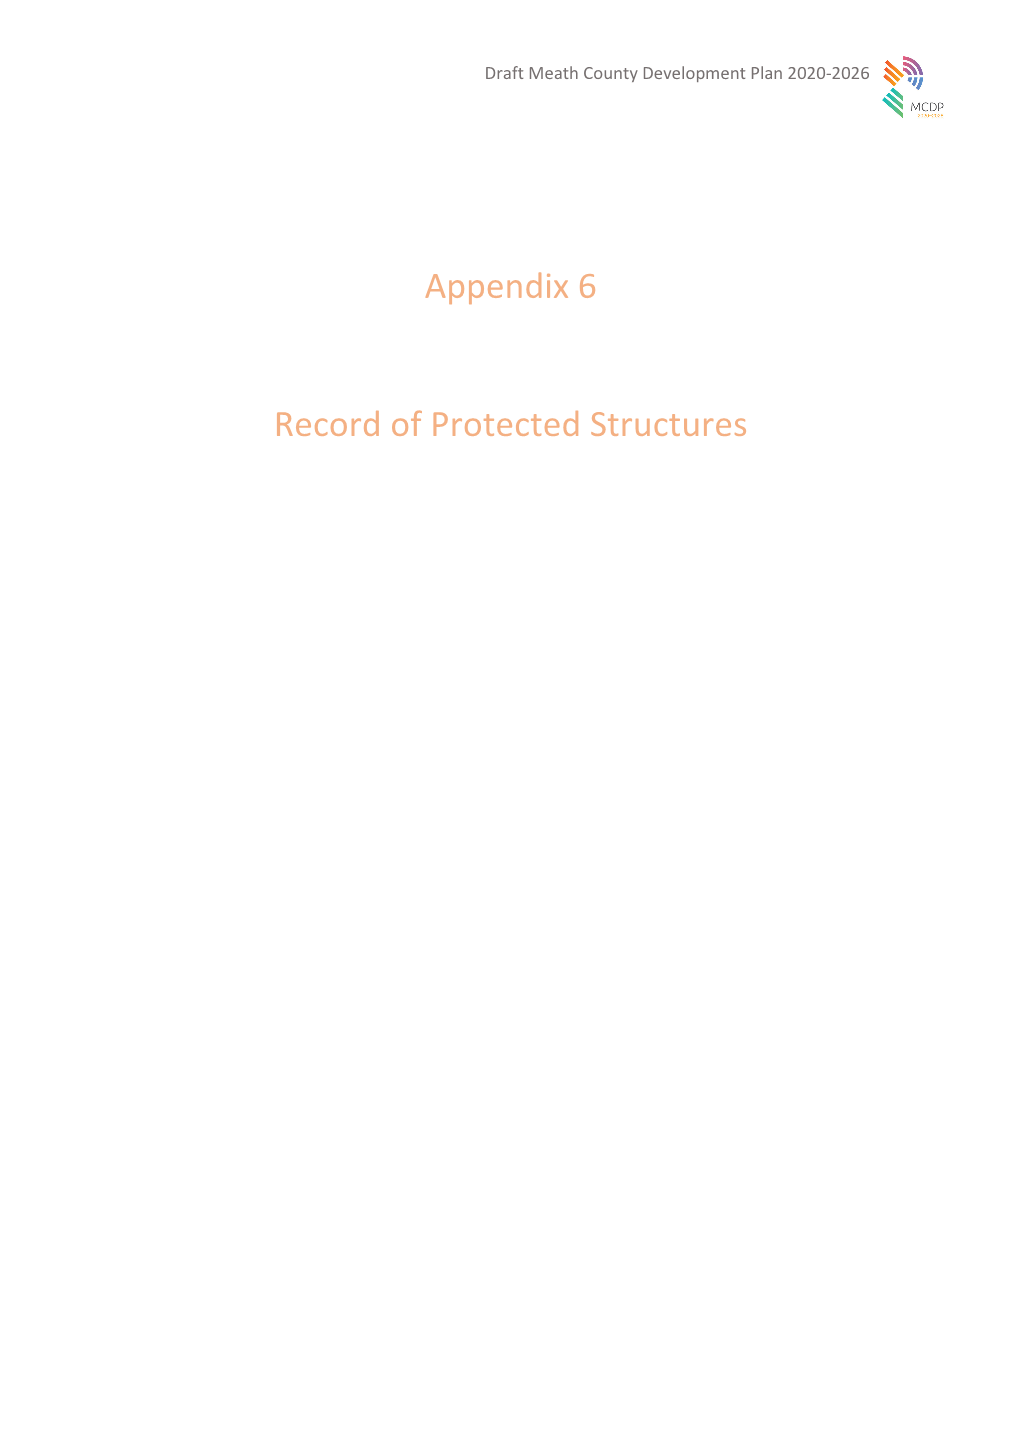 Appendix 6 Record of Protected Structures